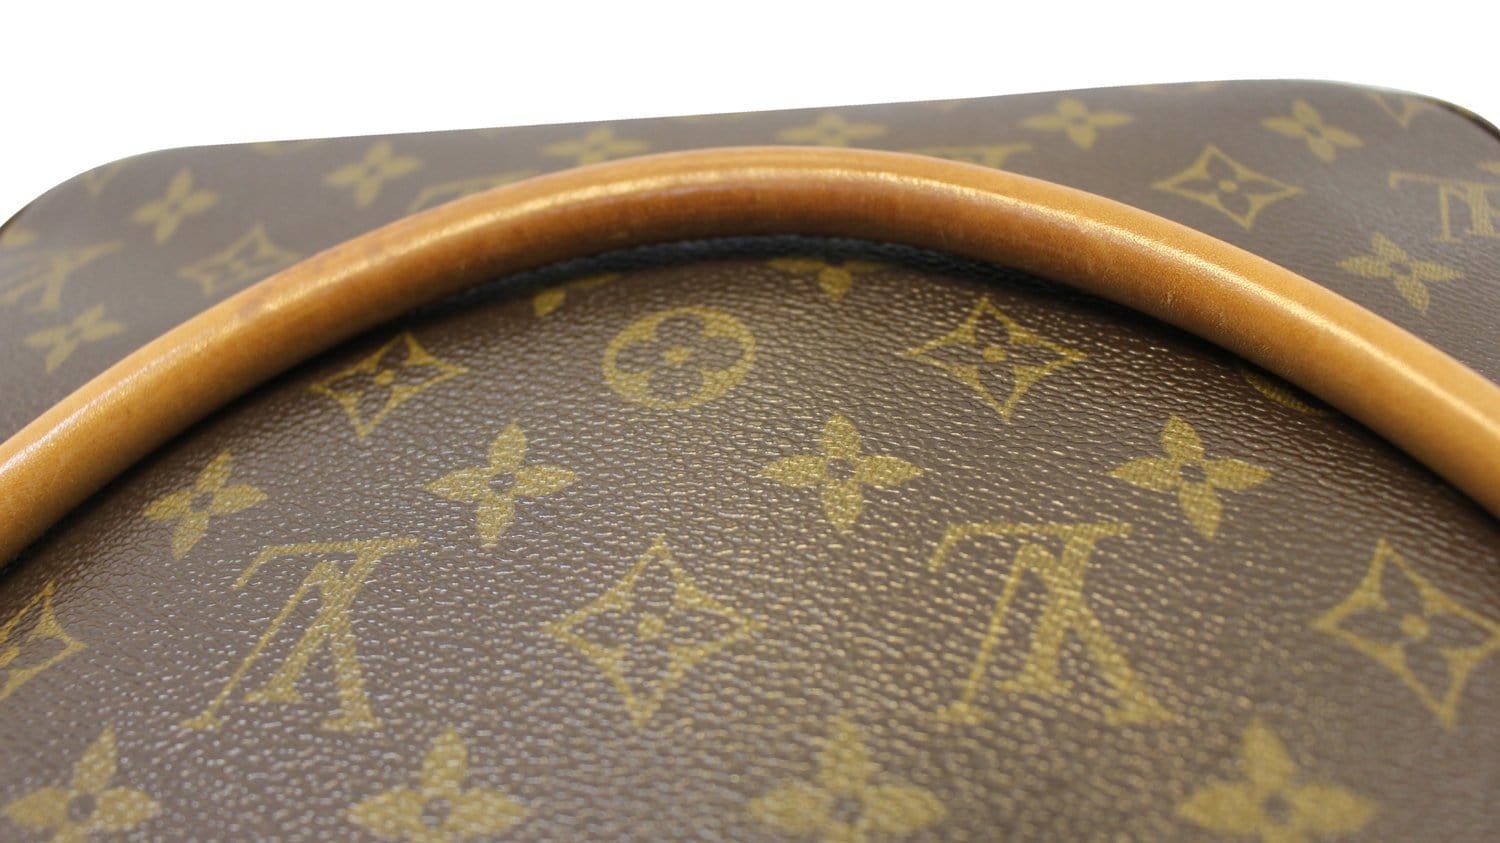 Louis Vuitton pre-owned Looping GM Shoulder Bag - Farfetch